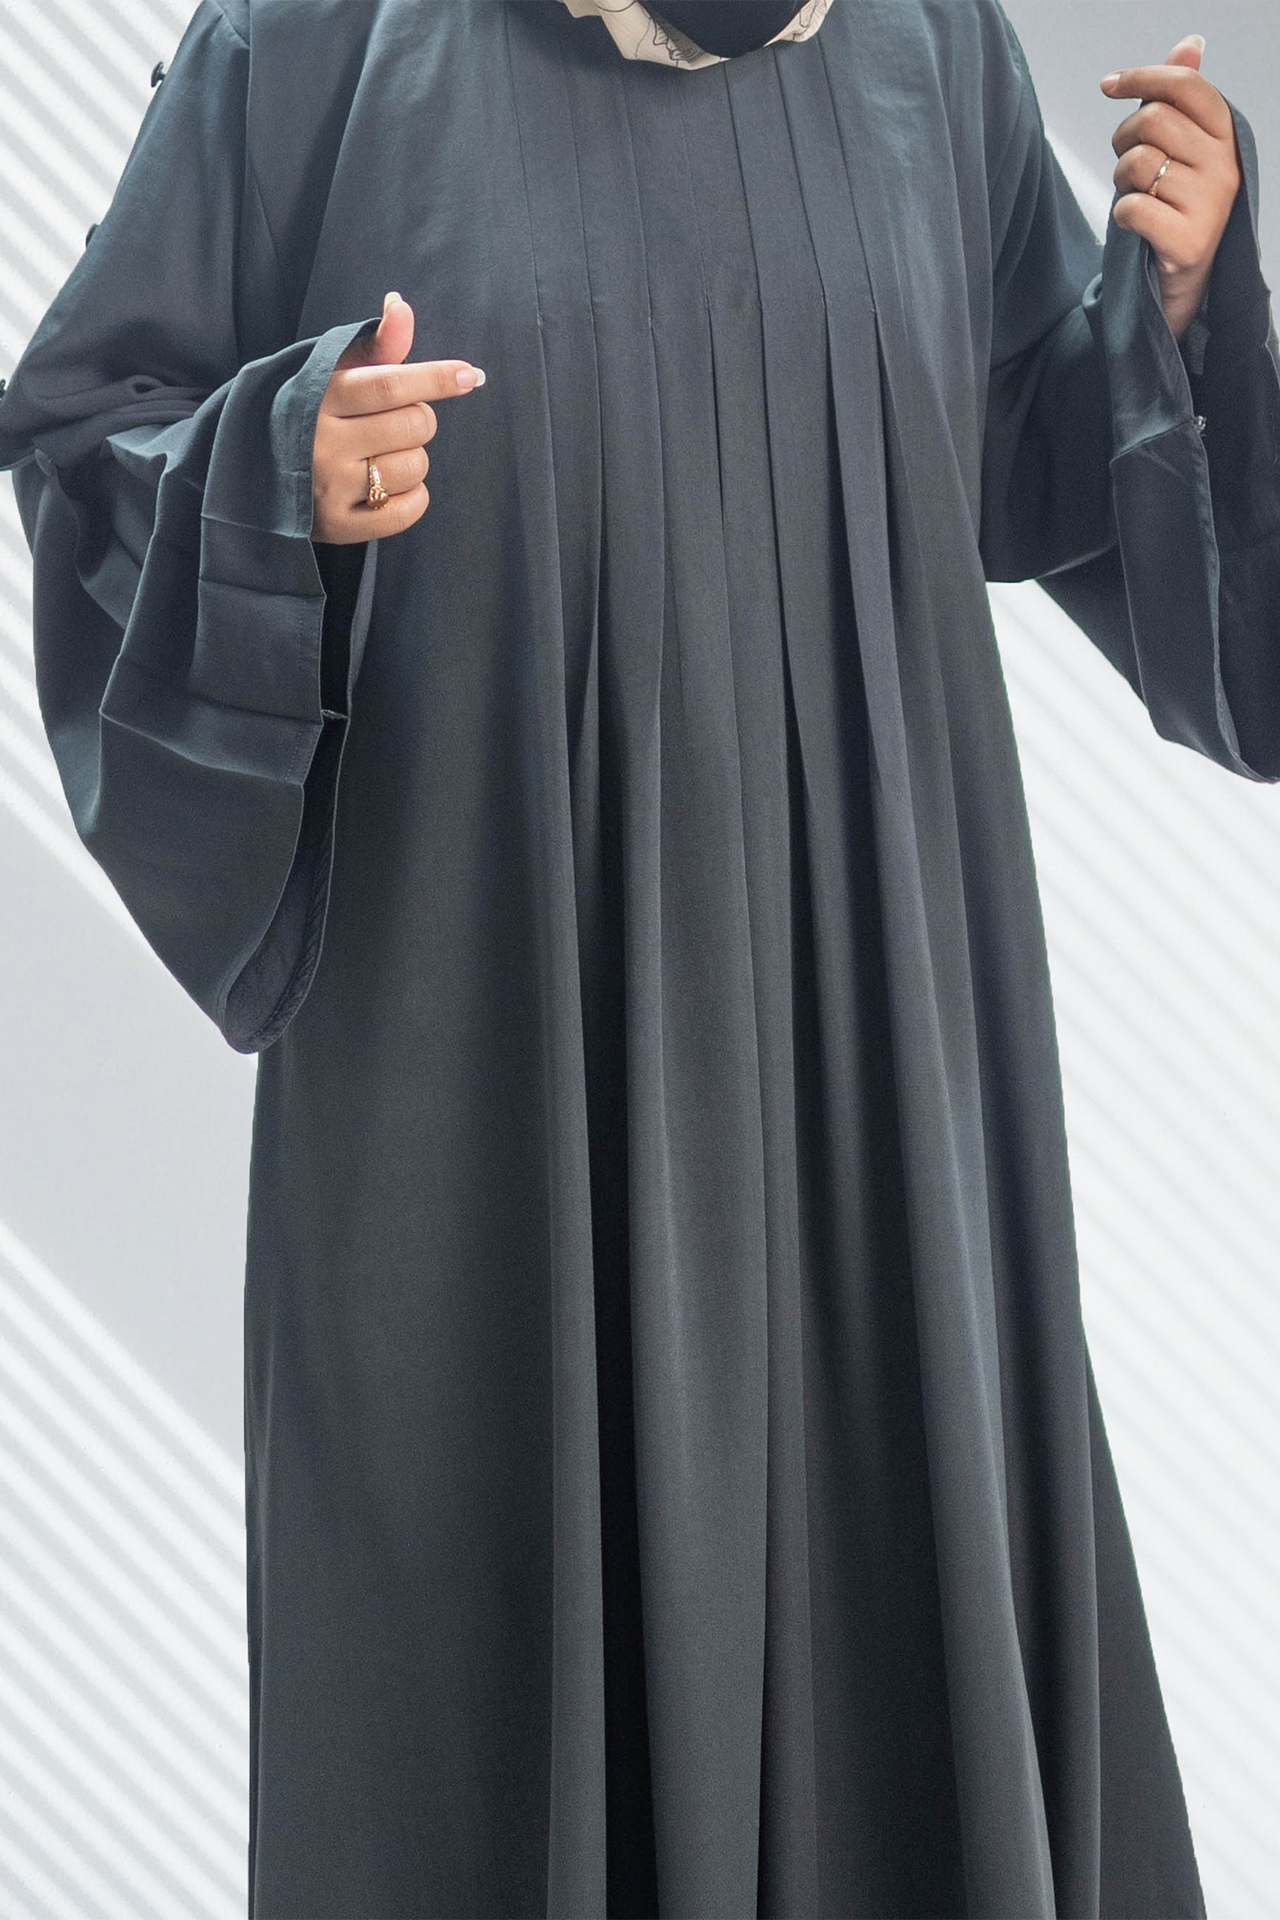 Platted Maxi With Long Sleeves- Dark Grey